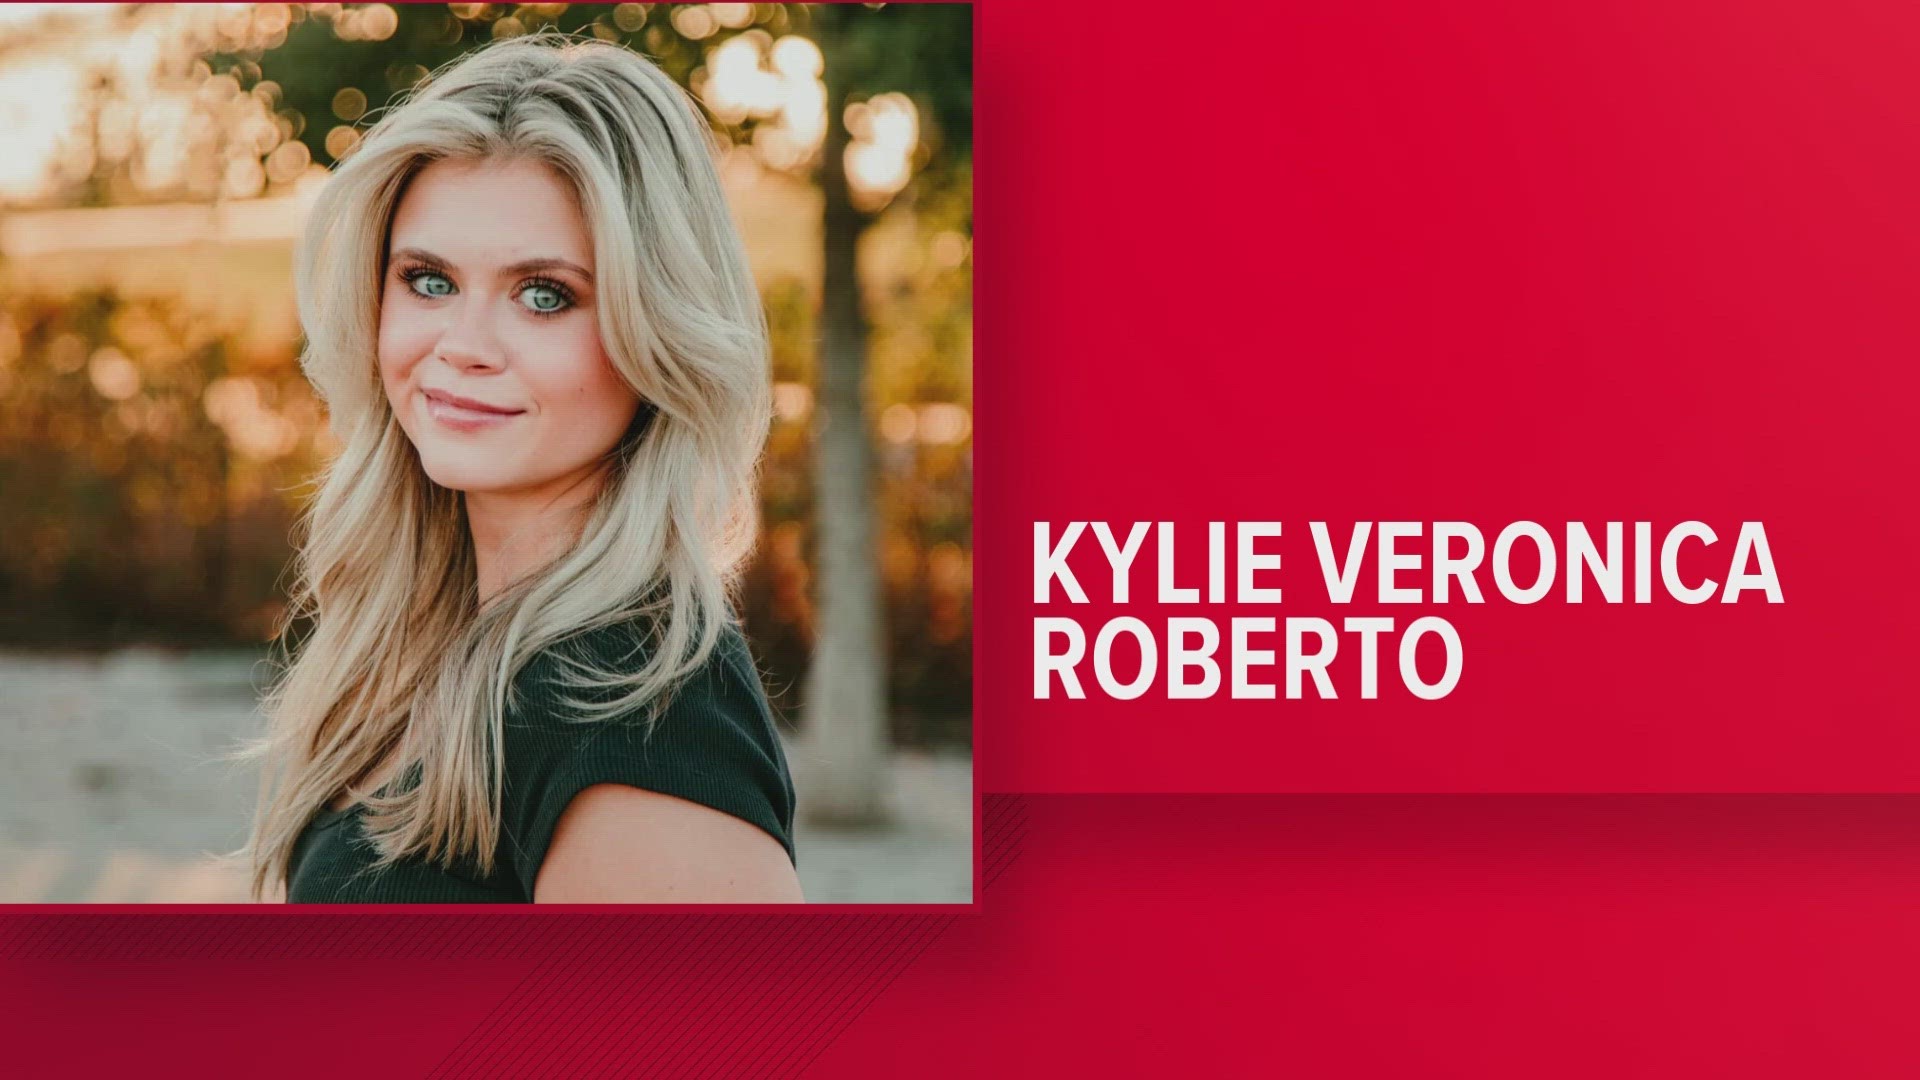 KCSO identified the victim as 21-year-old Kylie Veronica Roberto of Knoxville. She was Knoxville 2nd District Councilmember Andrew Roberto's daughter.